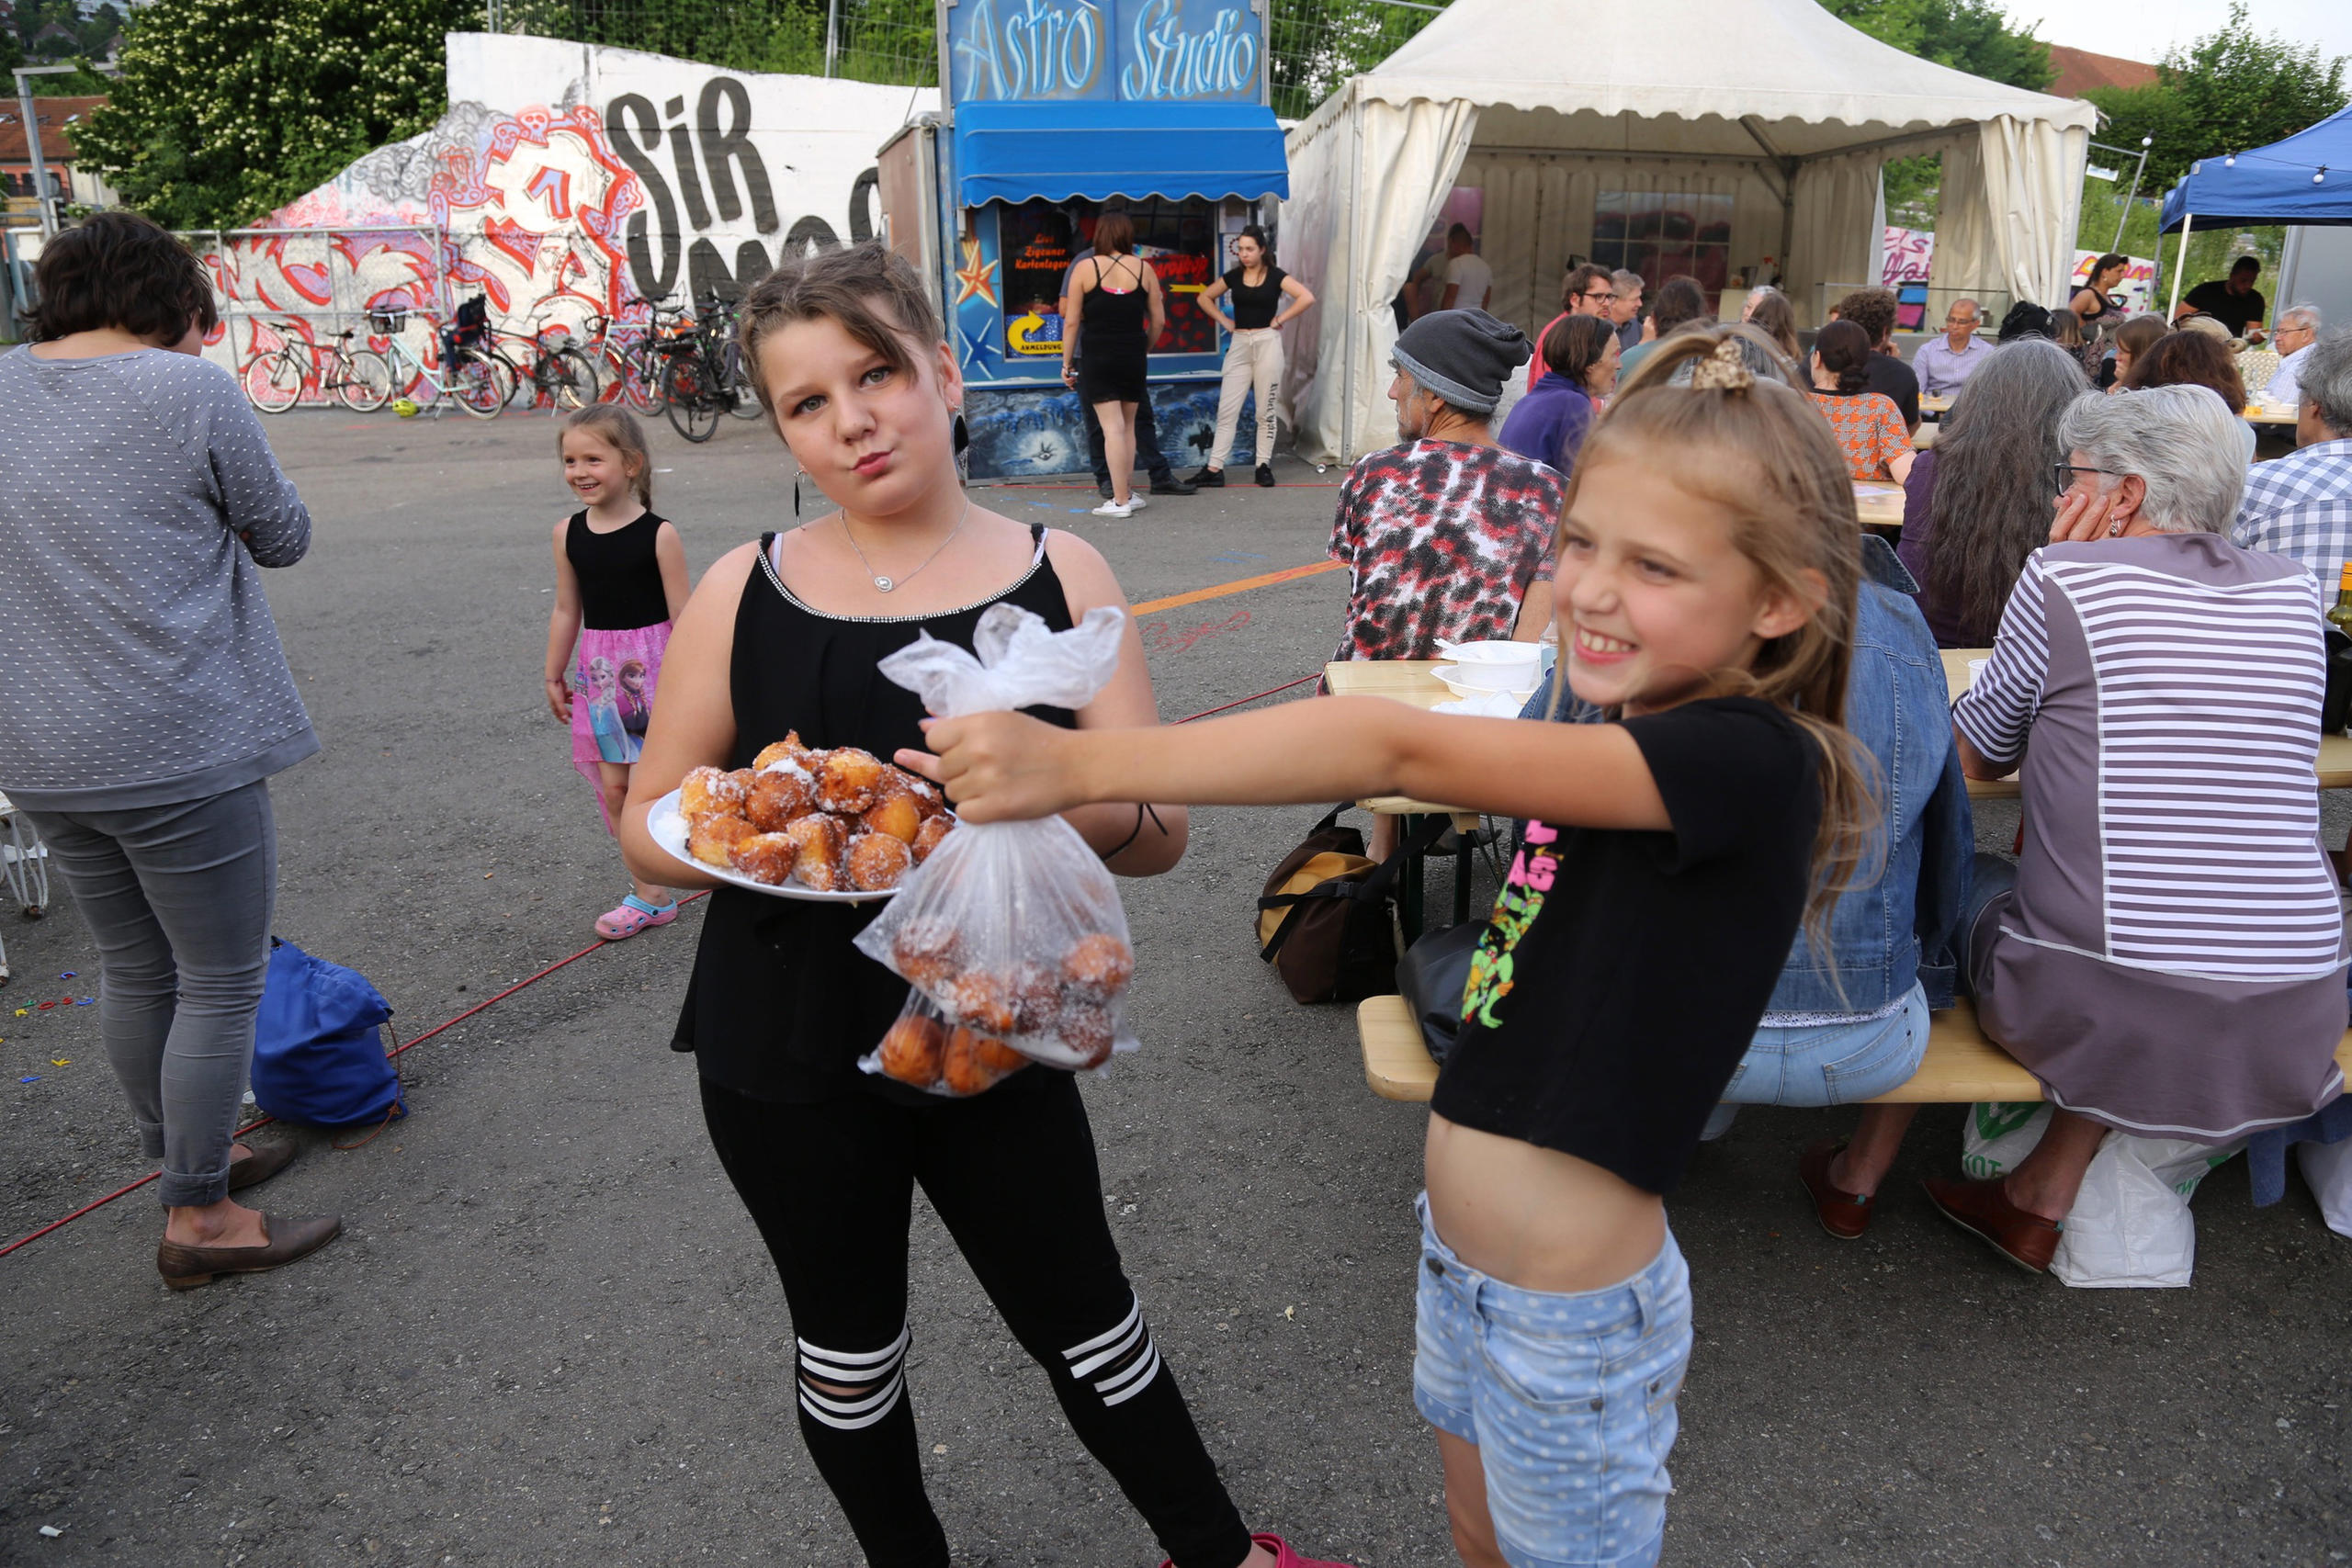 two young girls, one holding a plate of doughnuts, the other holding a bag of doughnuts. People sitting in the background